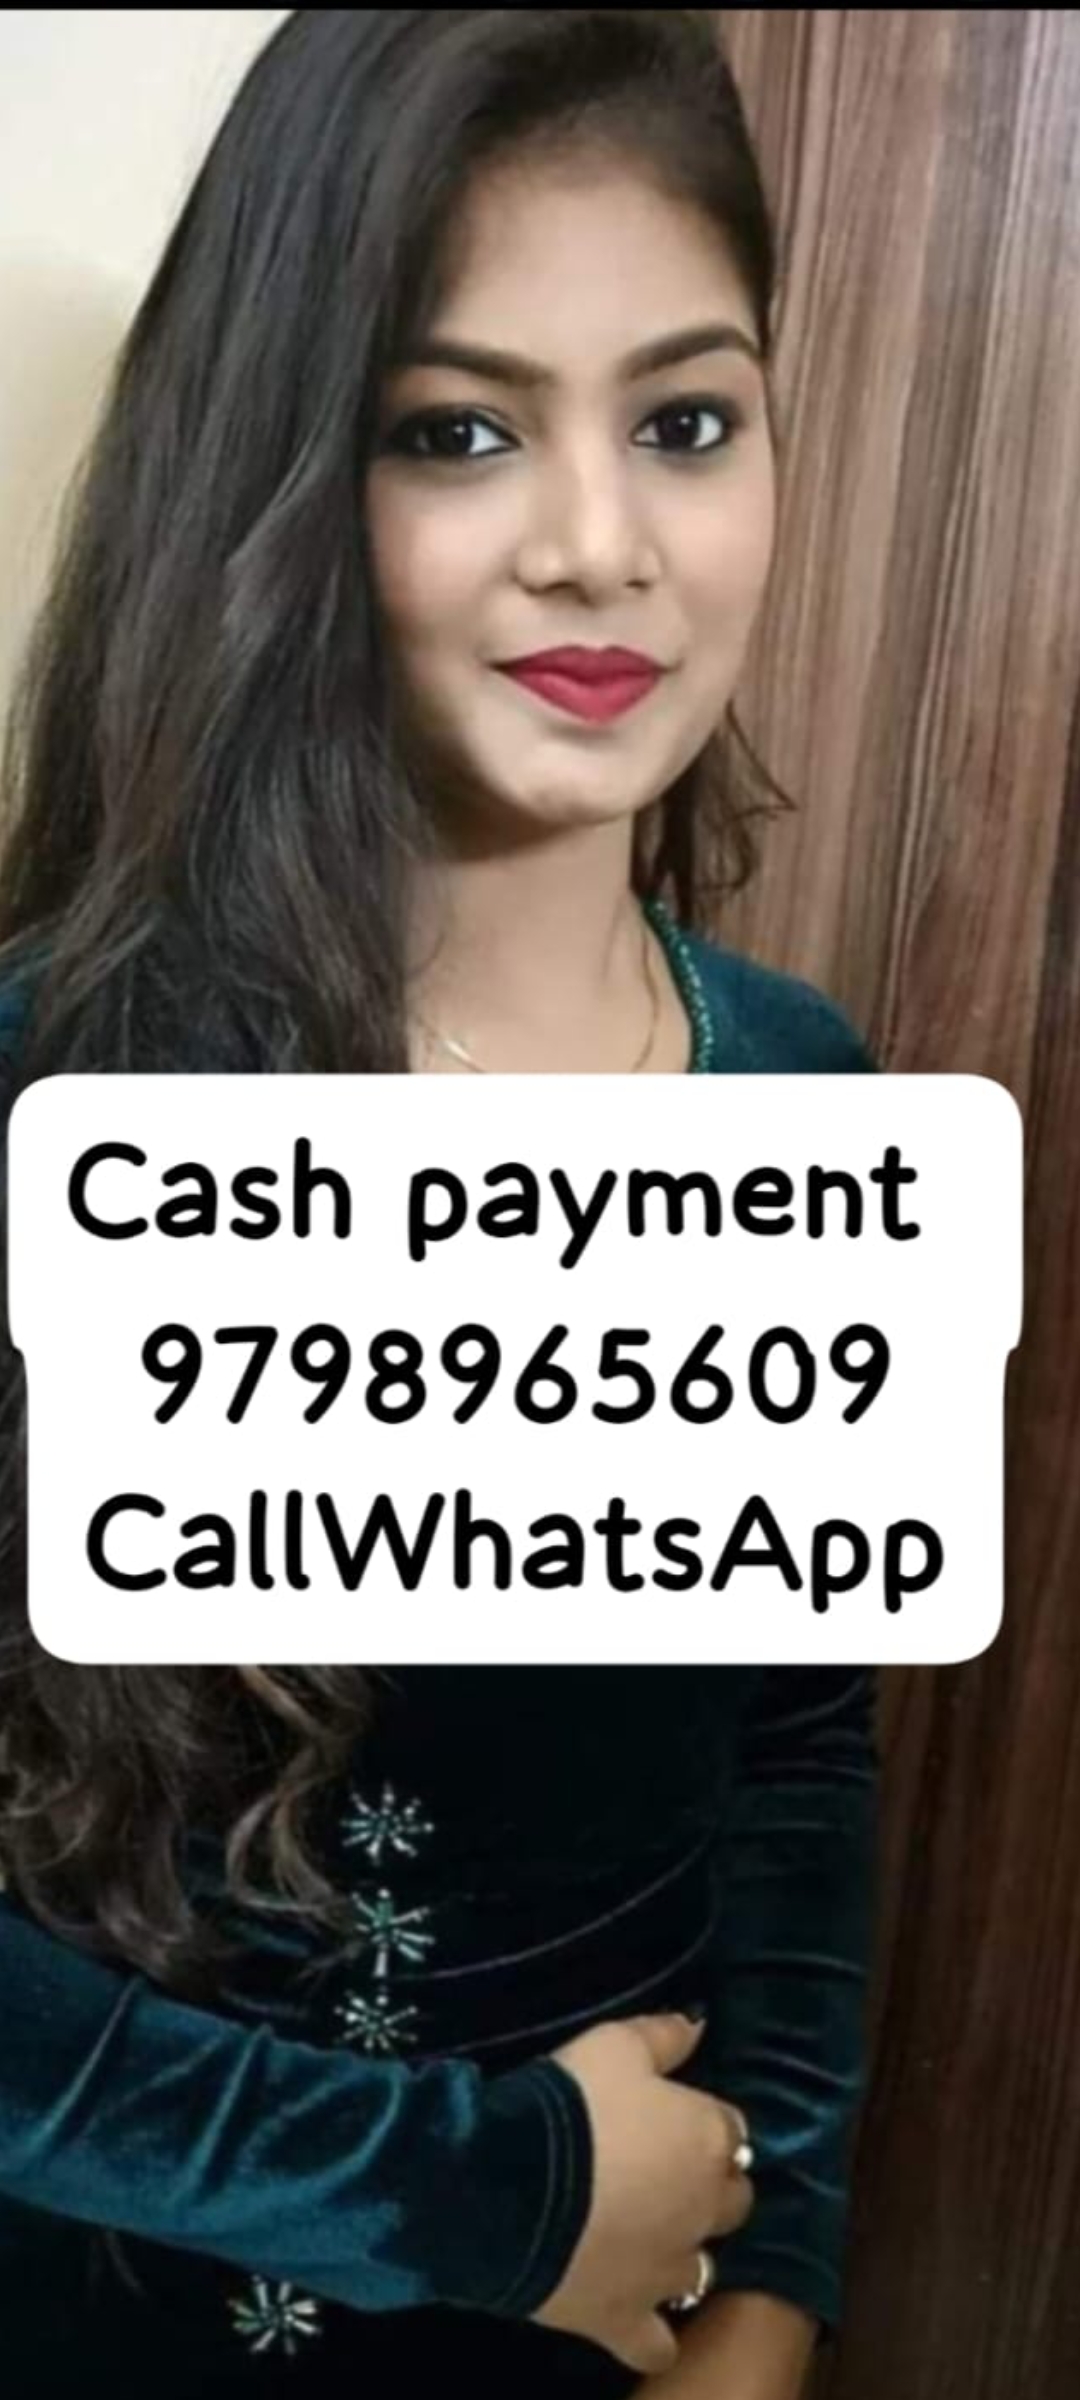 Jalgaon in call girl VIP model service anytime available low price 